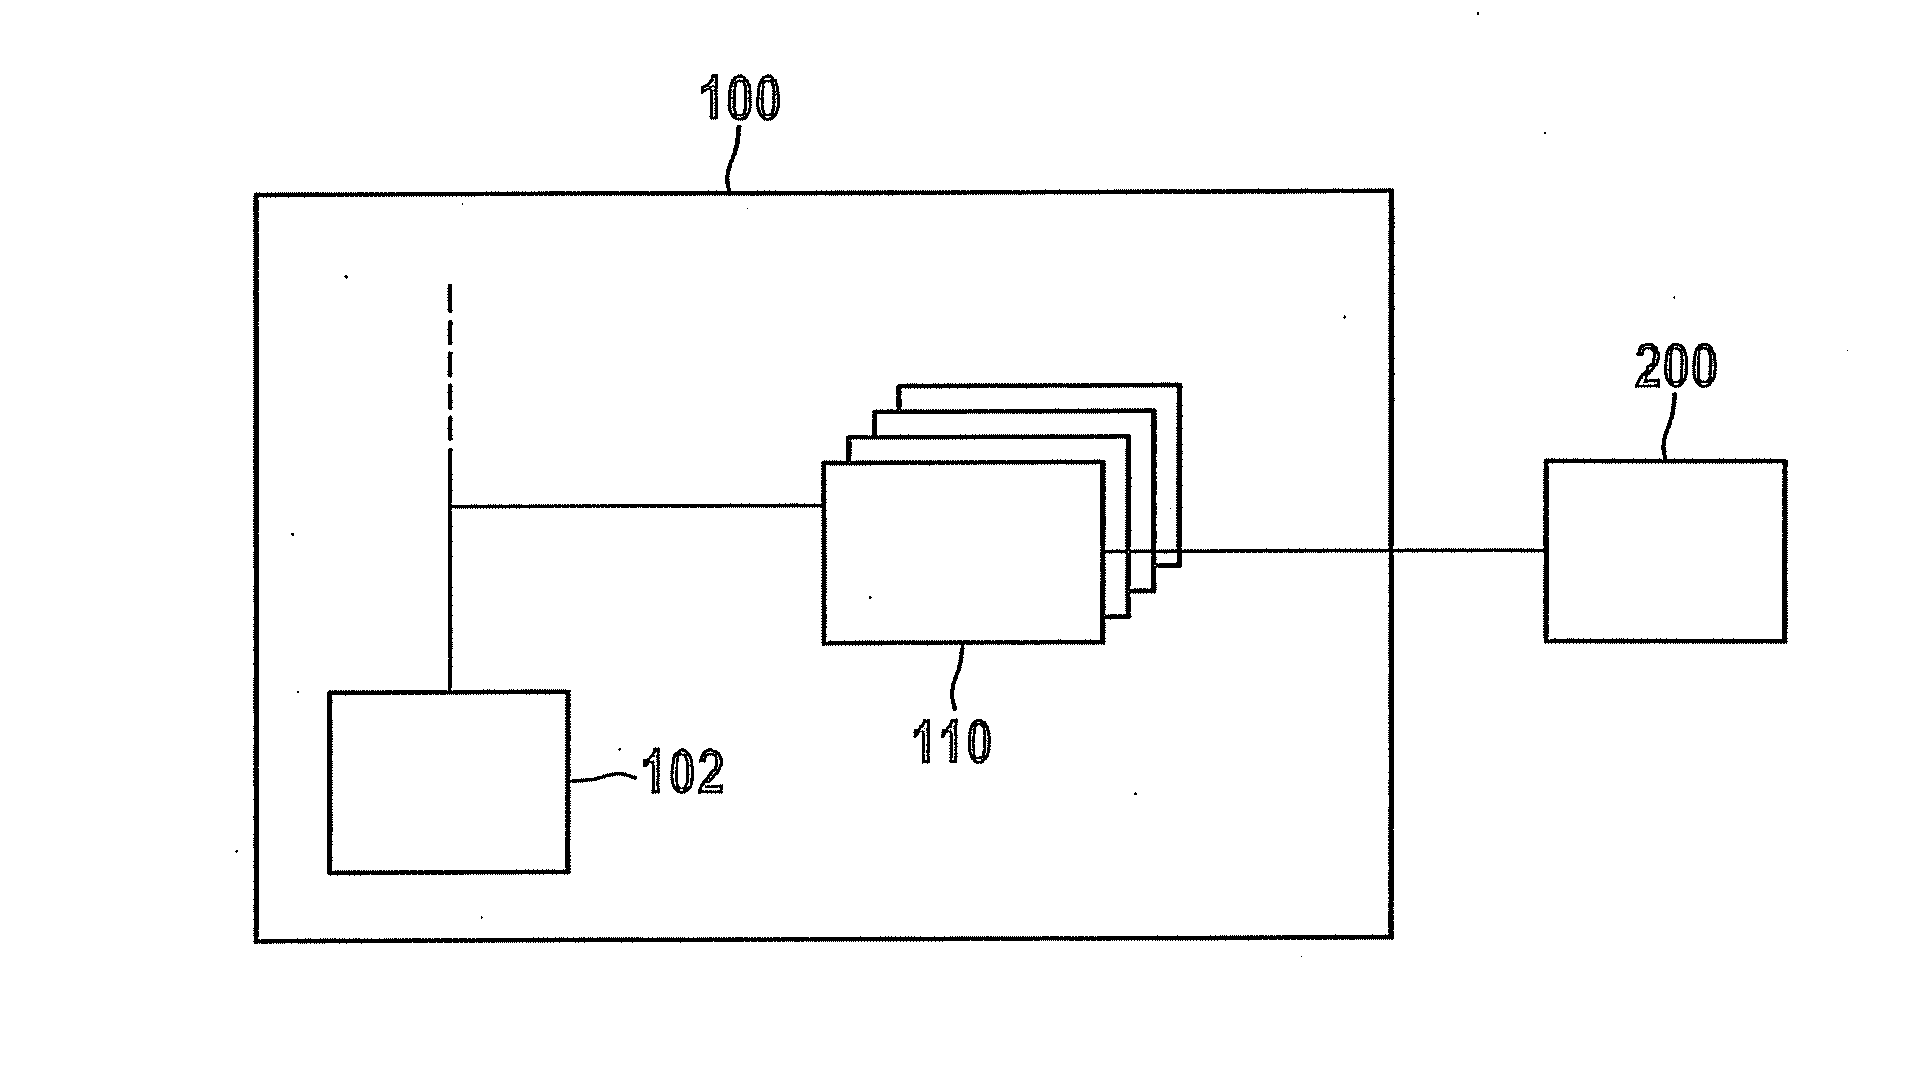 Control unit for the exchange of data with a peripheral unit, peripheral unit, and method for data exchange